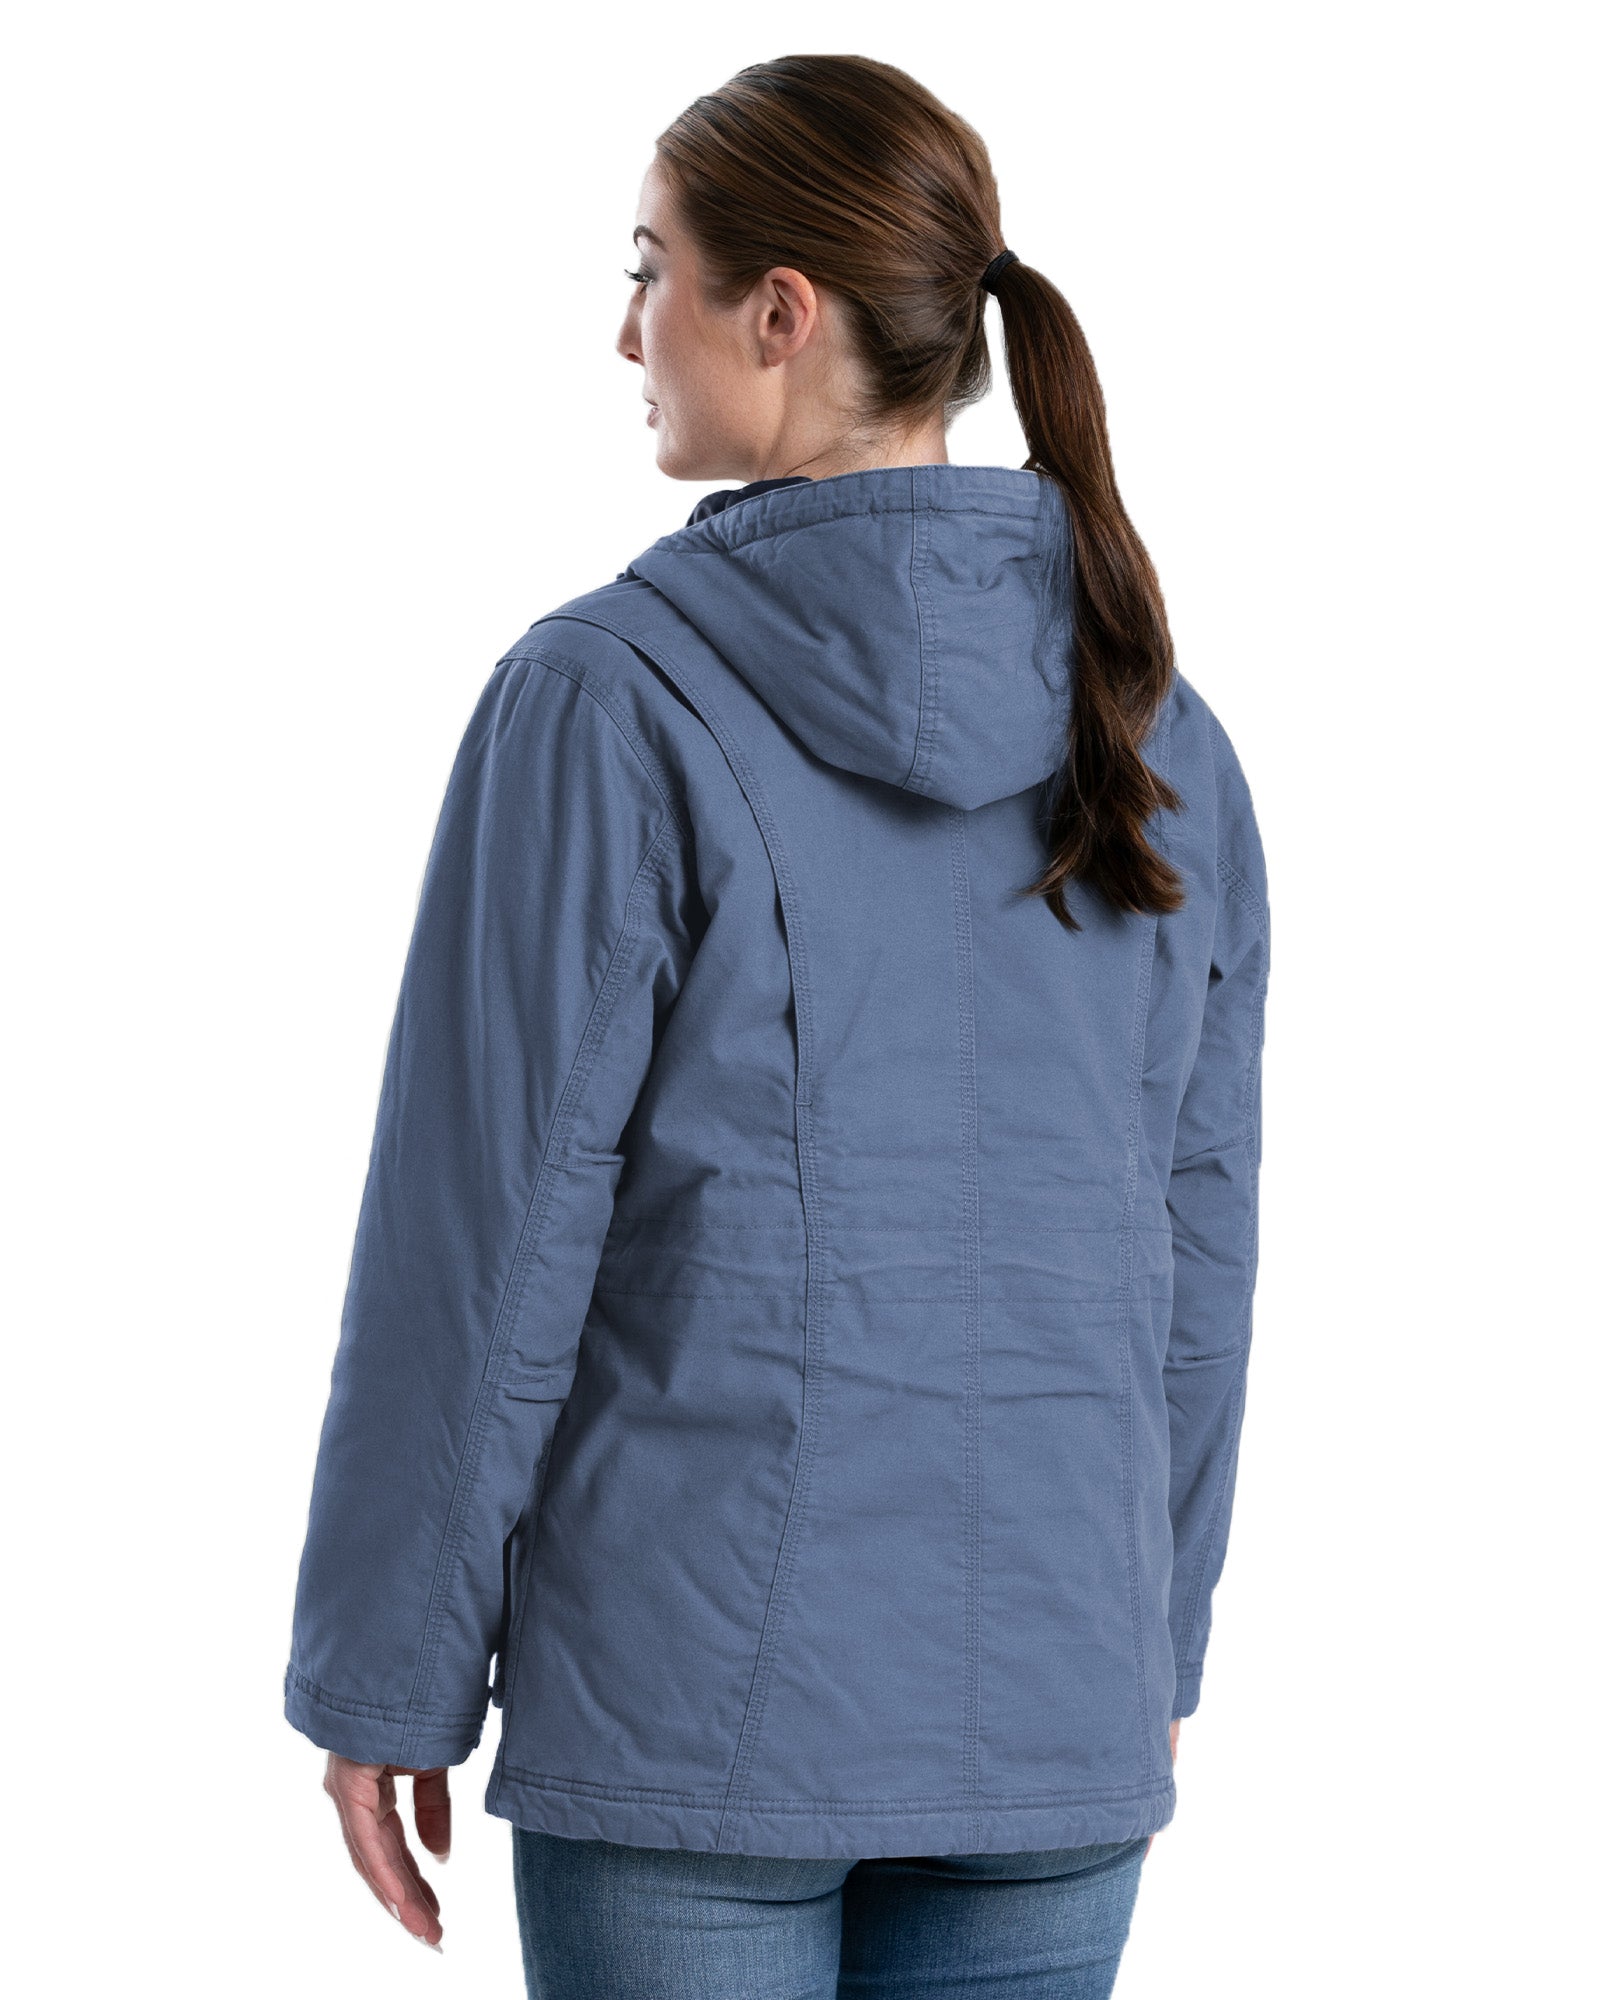 WCH68SLB Women's Softstone Washed Duck Utility Coat